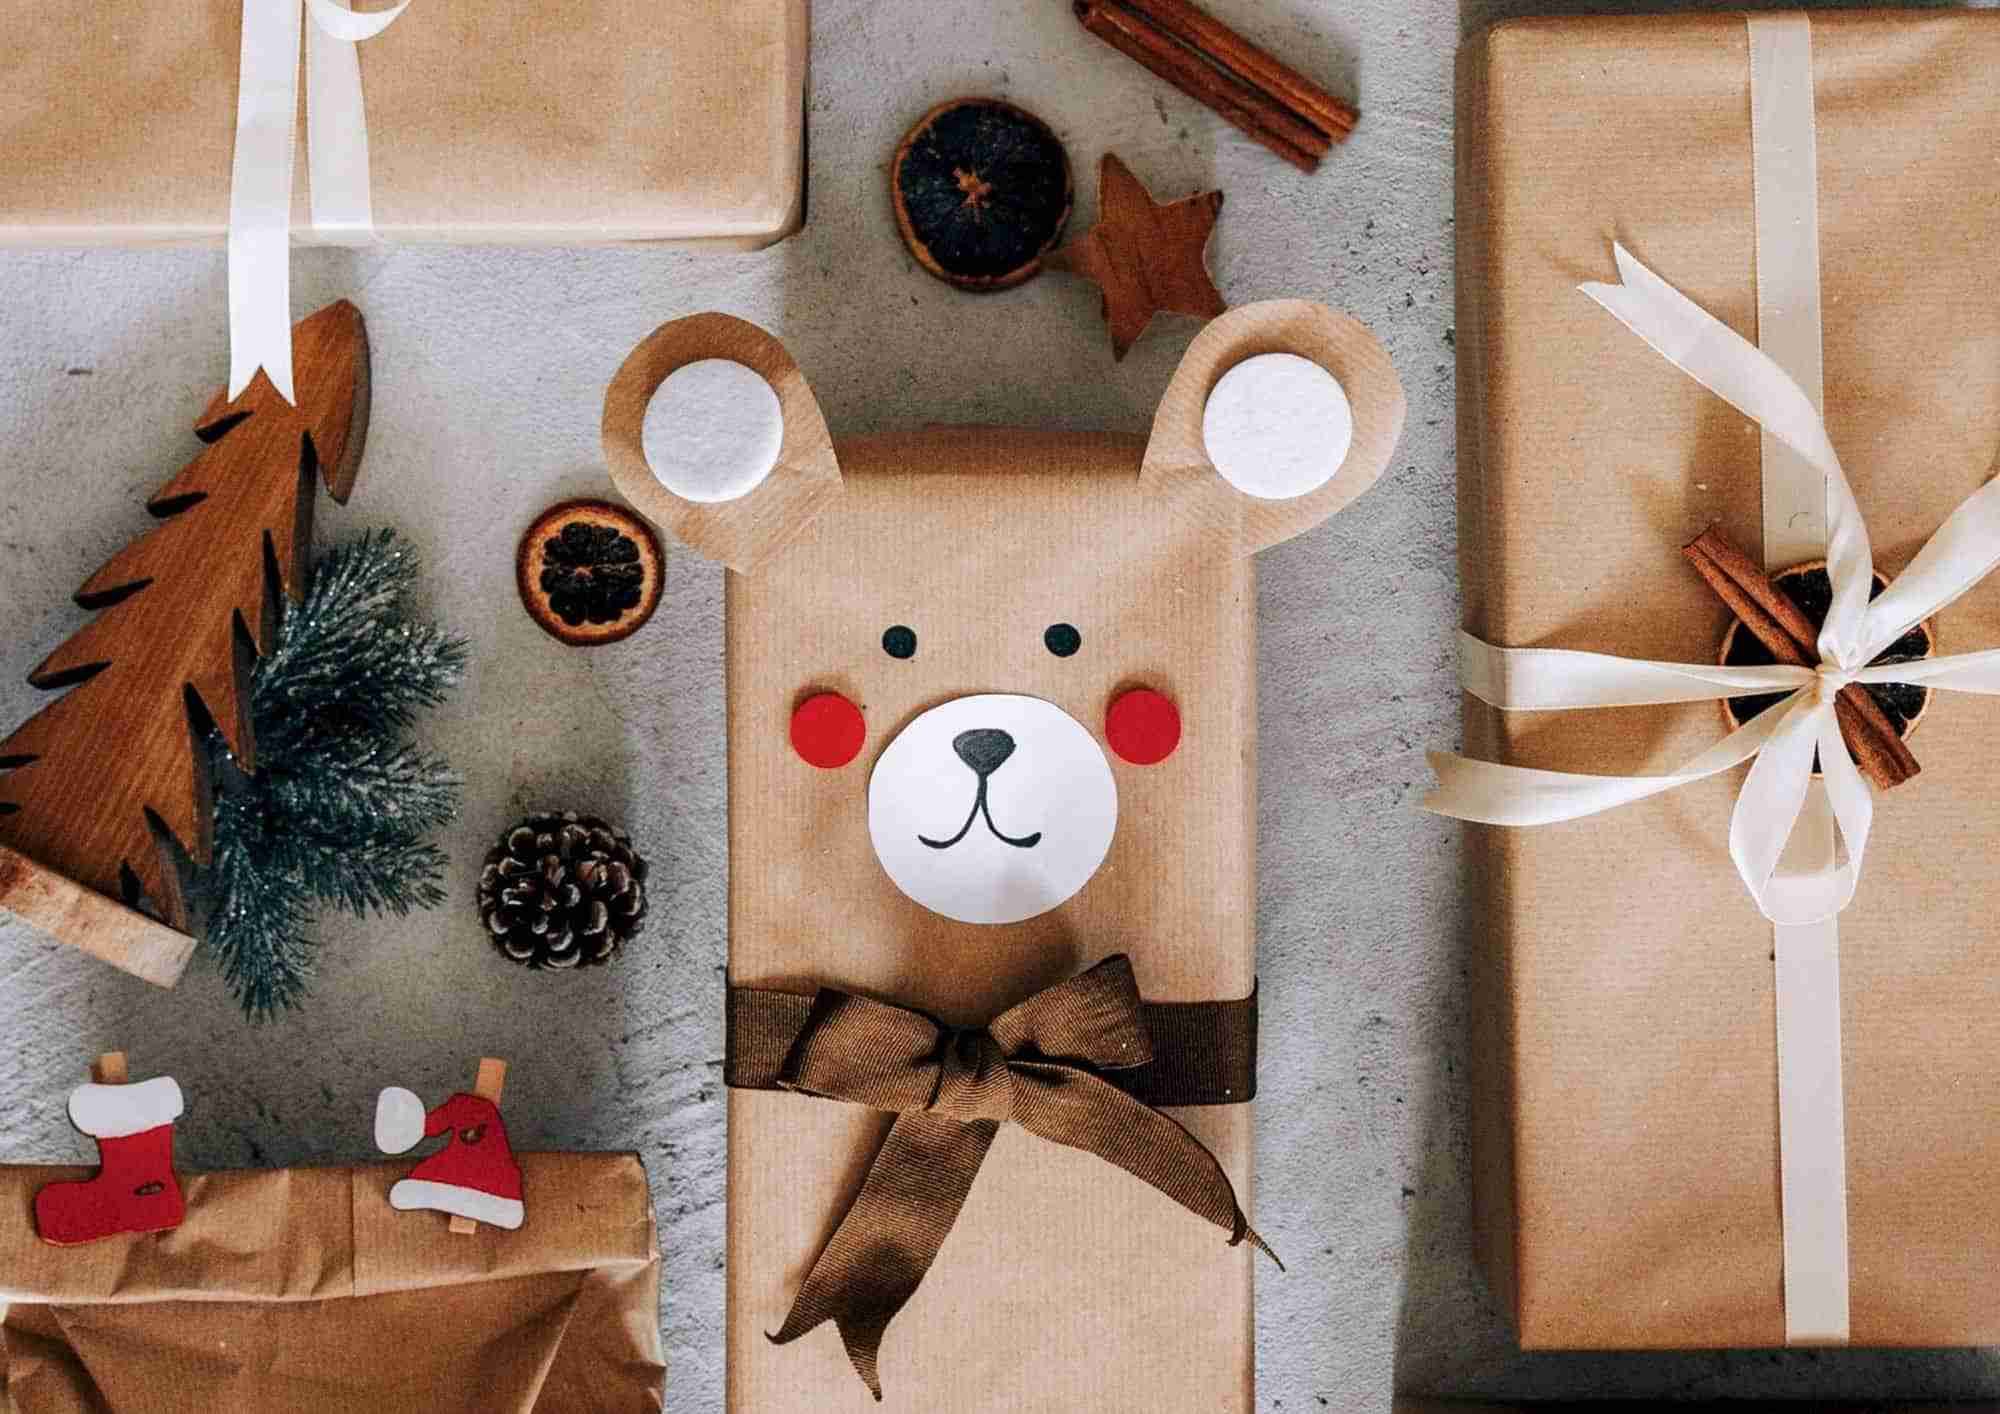 Christmas presents made to look like a teddy bear wrapped with recycled brown paper.